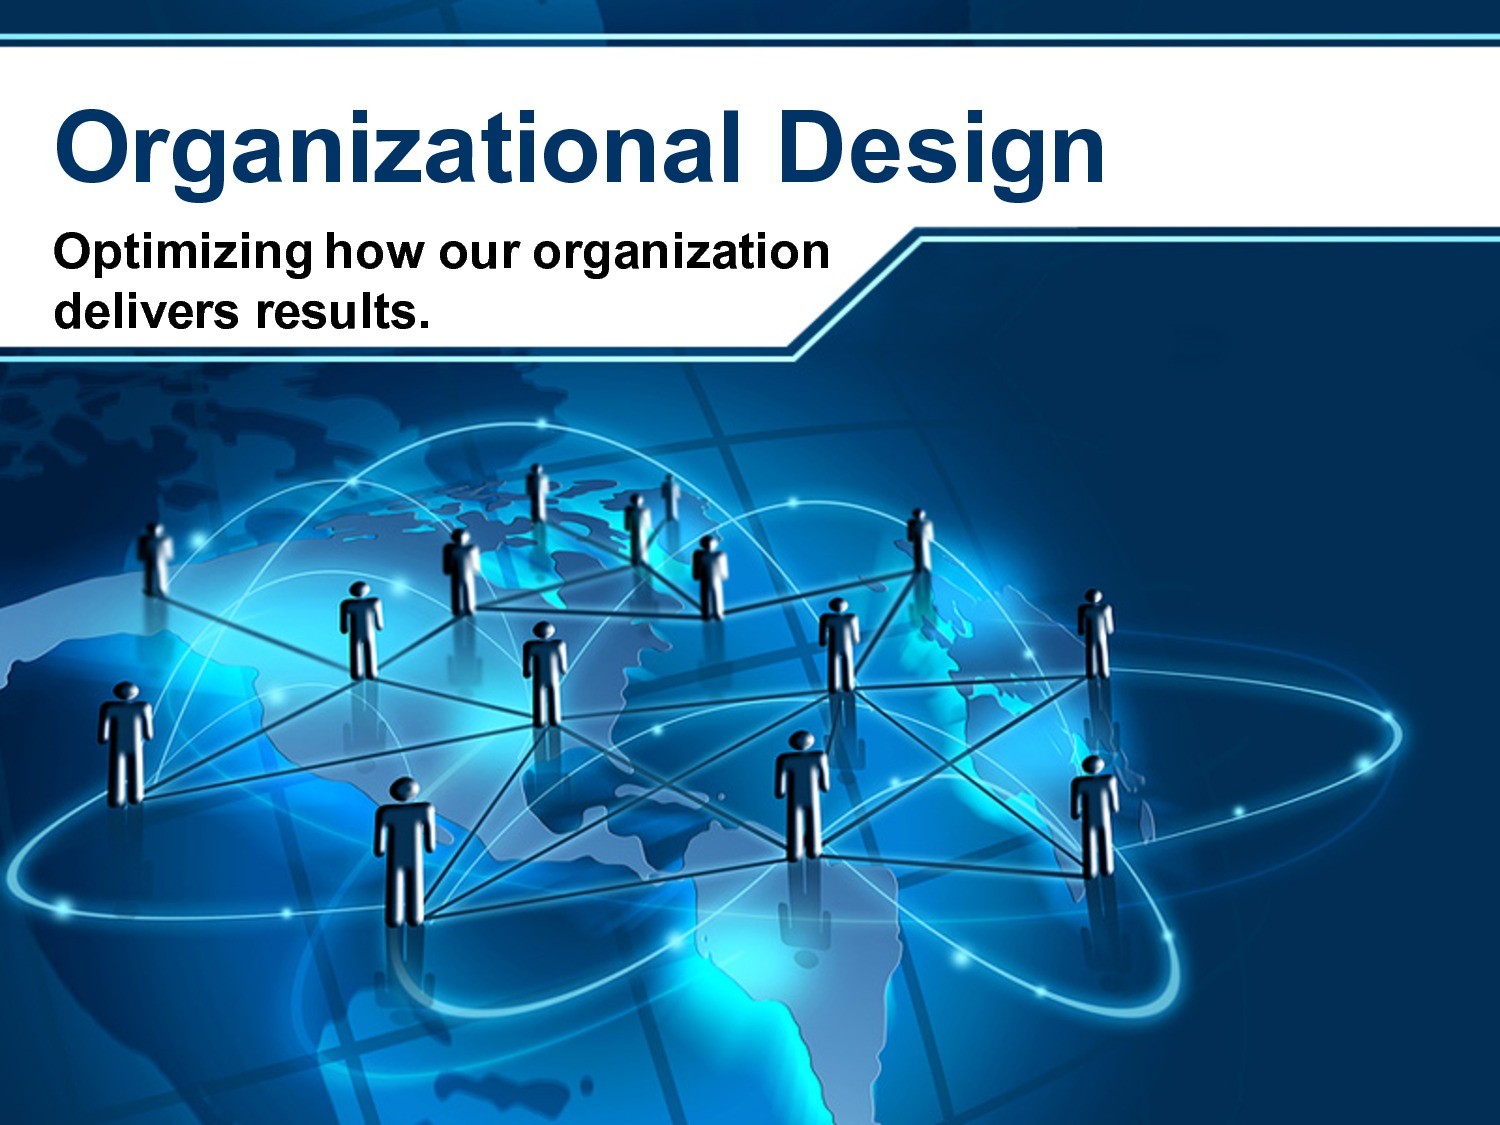 Organizational Design to Optimize Results